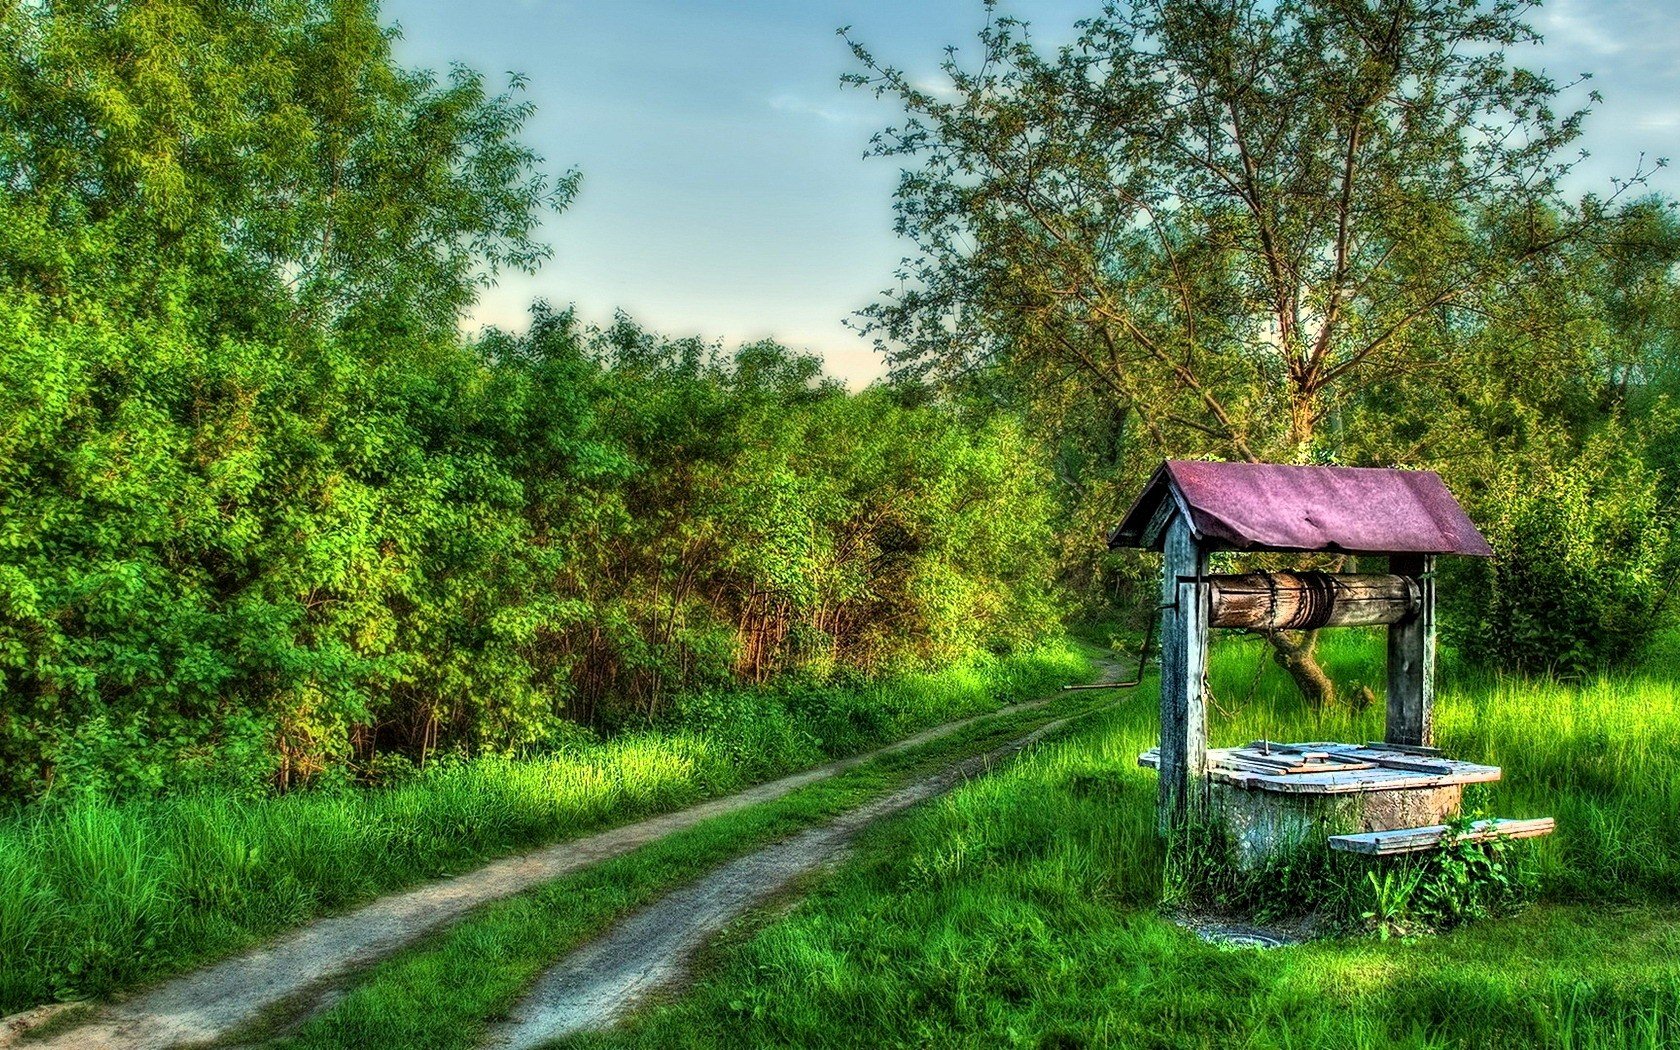 Old Wishing Well by Dirt Road Wallpaper and Background Image